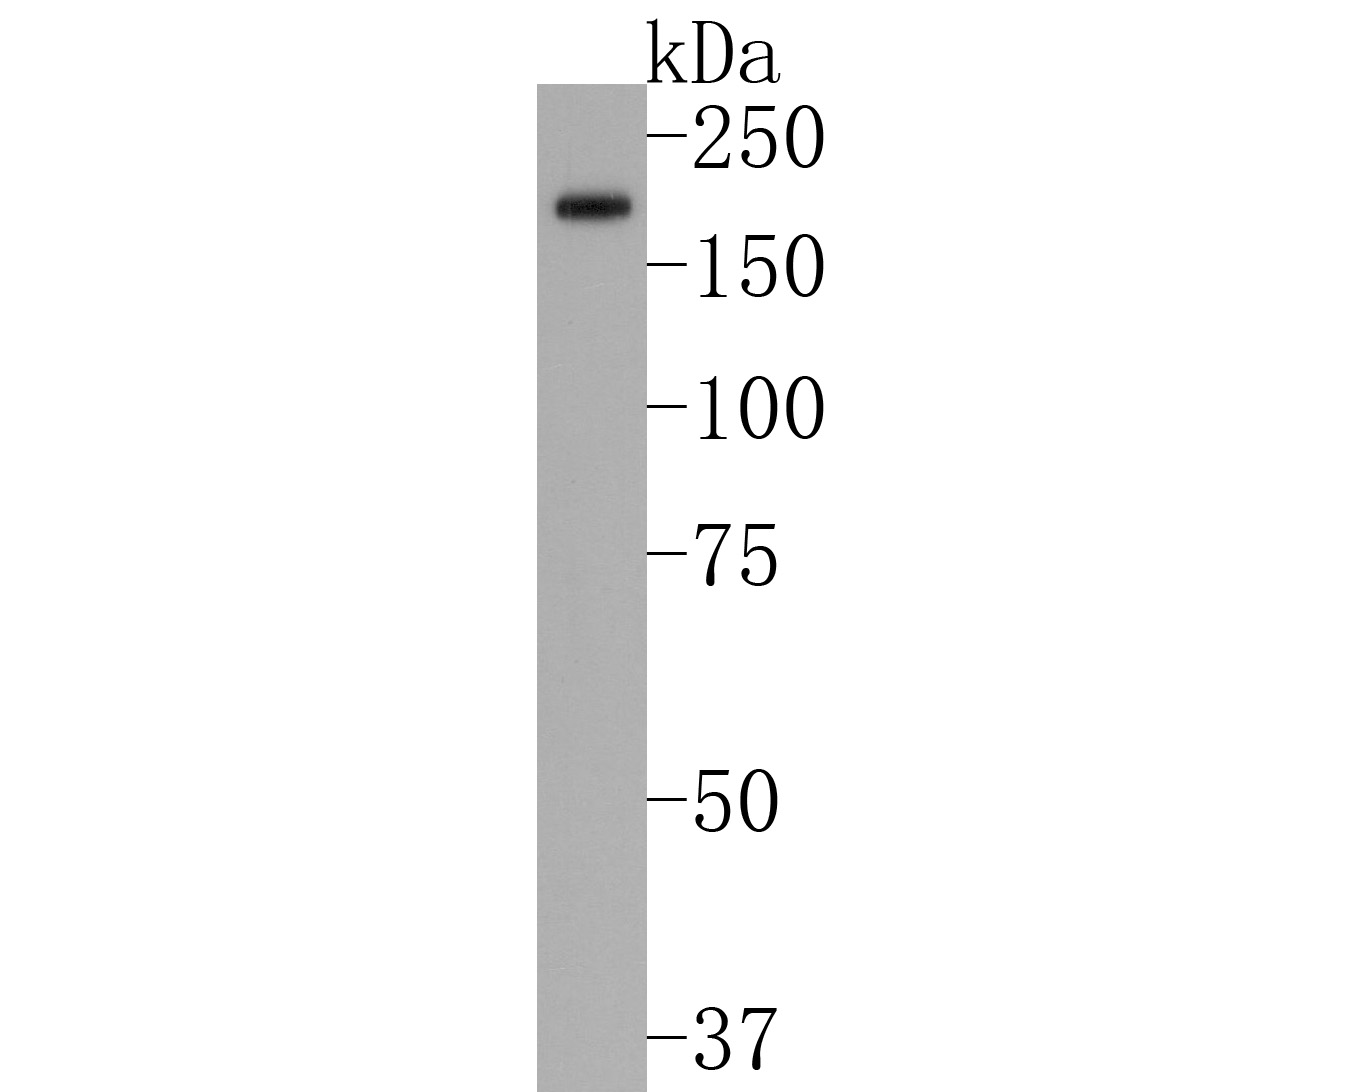 Western blot analysis of Factor H on human kidney tissue lysates. Proteins were transferred to a PVDF membrane and blocked with 5% BSA in PBS for 1 hour at room temperature. The primary antibody (ET1704-83, 1/500) was used in 5% BSA at room temperature for 2 hours. Goat Anti-Rabbit IgG - HRP Secondary Antibody (HA1001) at 1:200,000 dilution was used for 1 hour at room temperature.